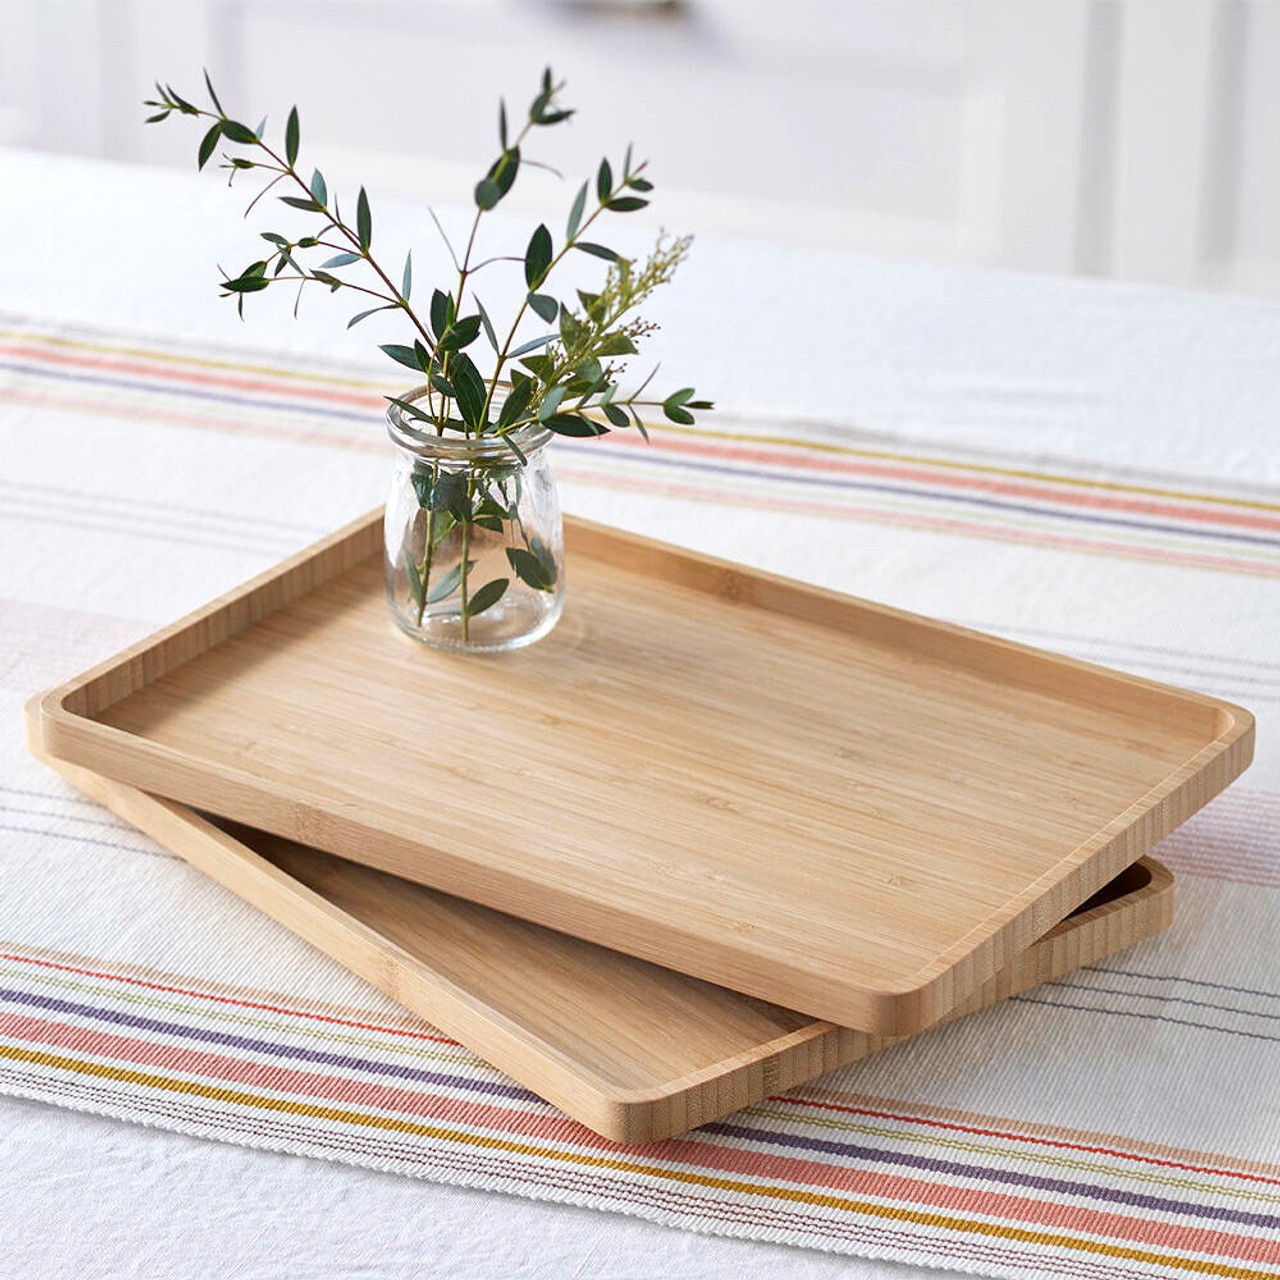  Bamboo Serving Tray,Food Tray for Eating on Bed,Coffee